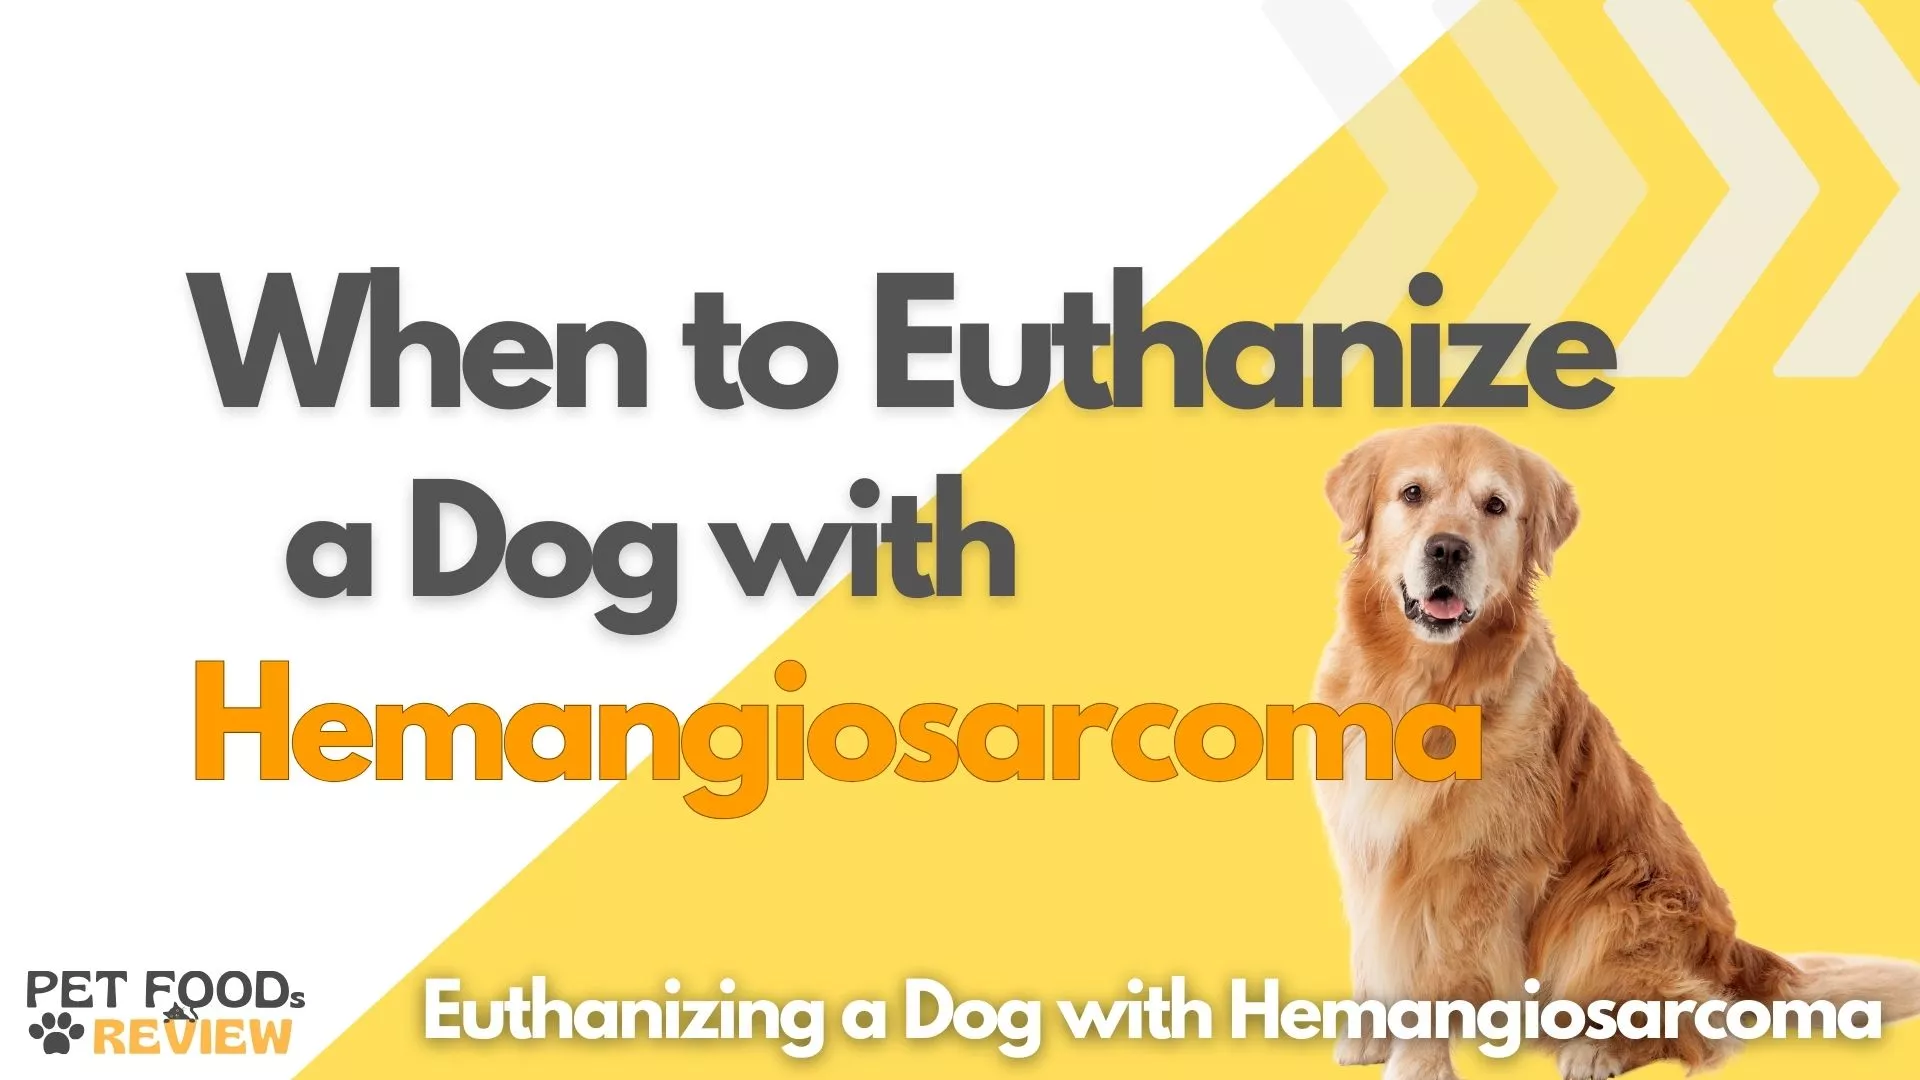 When to Euthanize a dog with Hemangiosarcoma